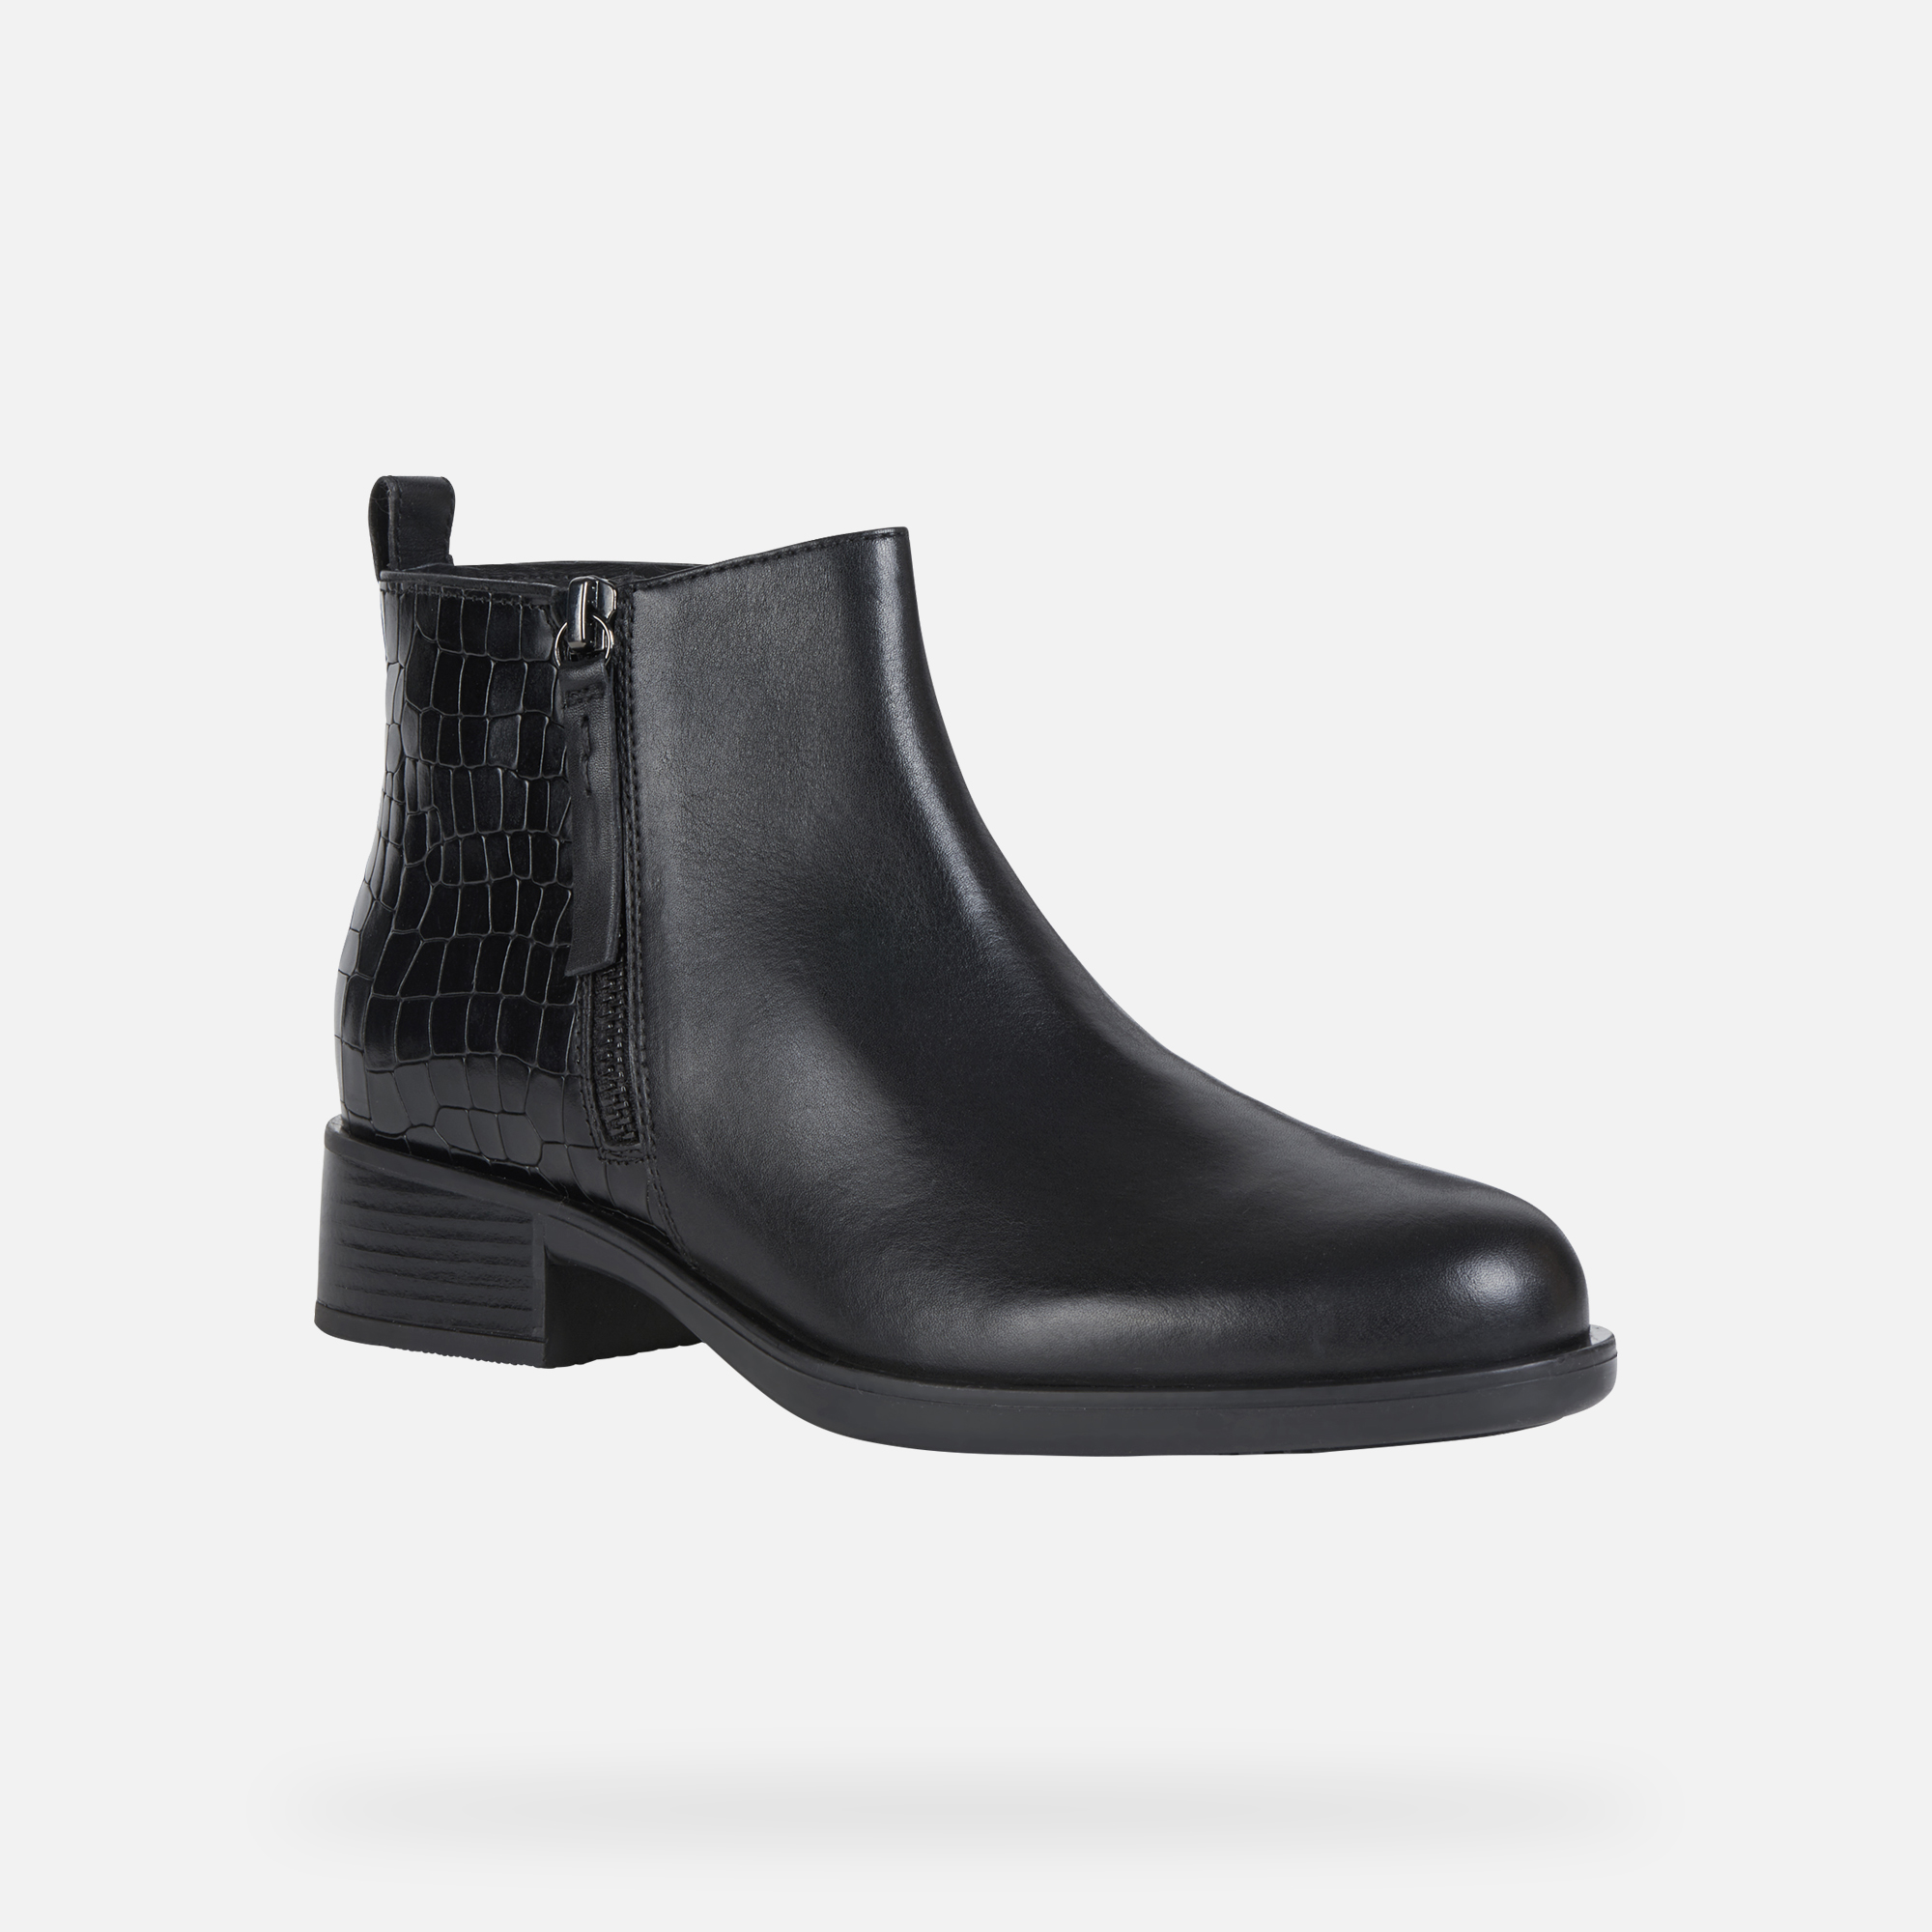 Geox® RESIA Woman: Black Ankle Boots | FW21/22 Geox®